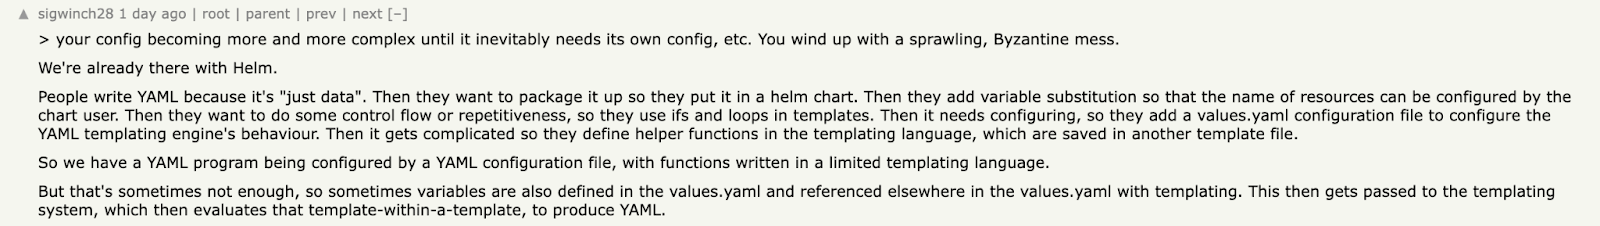 Quote: &quot;Your config becoming more and more complex until it inevitably needs its own config, etc. You wind up with a sprawling, Byzantine mess.&quot;
We&#39;re already there with Helm. People write YAML because it&#39;s &quot;just data&quot;. Then they want to package it up so they put it in a helm chart. Then they add variable substitution so that the name of resources can be configured by the chart user. Then they want to do some control flow or repetitiveness, so they use ifs and loops in templates. Then it needs configuring, so they add a values.yaml configuration file to configure the YAML templating engine&#39;s behaviour. Then it gets complicated so they define helper functions in the templating language, which are saved in another template file. So we have a YAML program being configured by a YAML configuration file, with functions written in a limited templating language. But that&#39;s sometimes not enough, so sometimes variables are also defined in the values.yaml and referenced elsewhere in the values.yaml with templating. This then gets passed to the templating system, which then evaluates that template-within-a-template, to produce YAML.